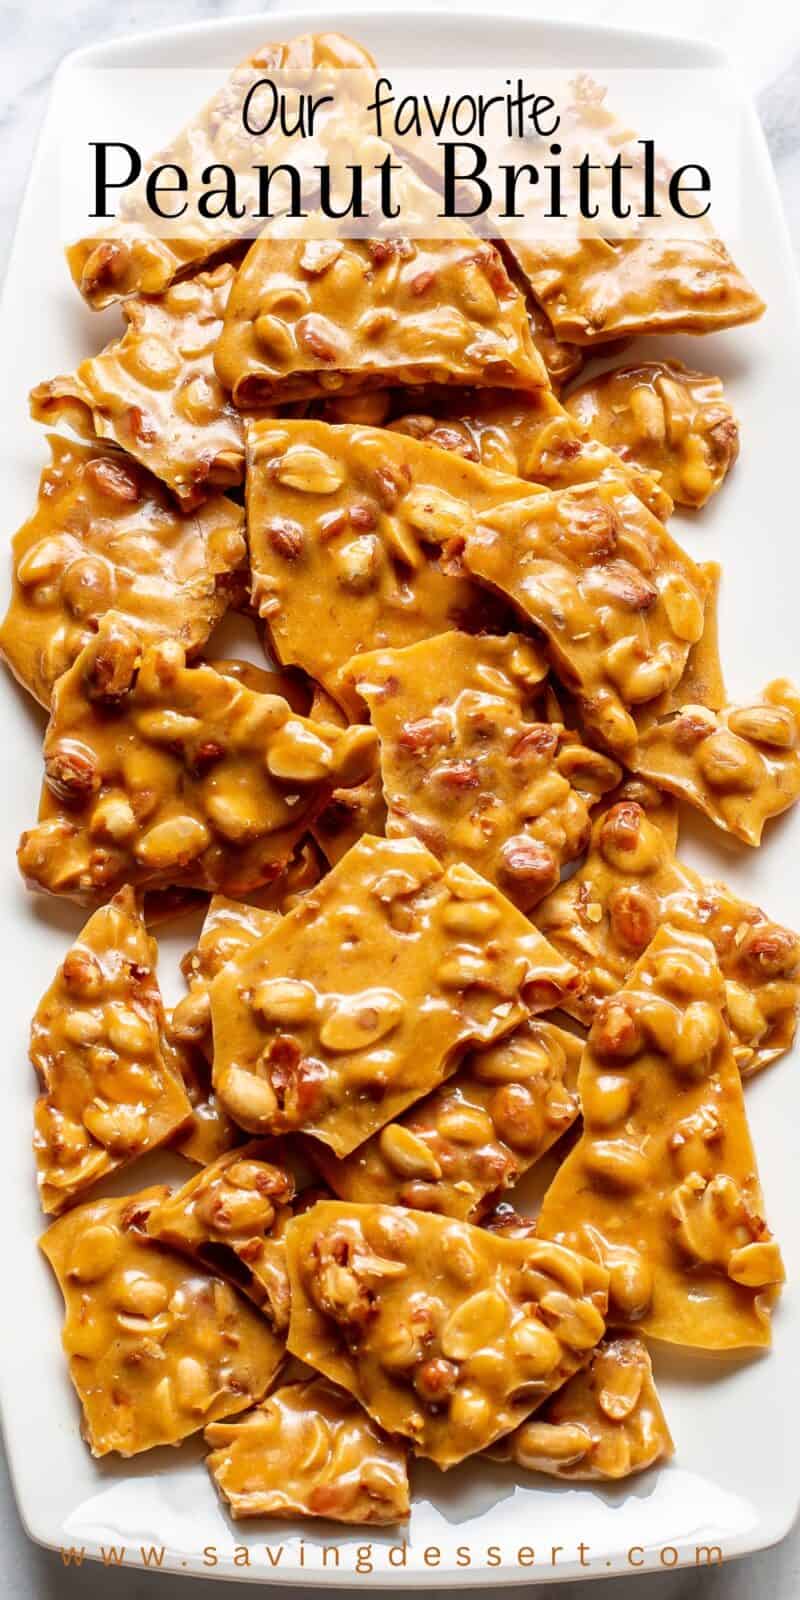 Overhead shot of a platter filled with peanut brittle